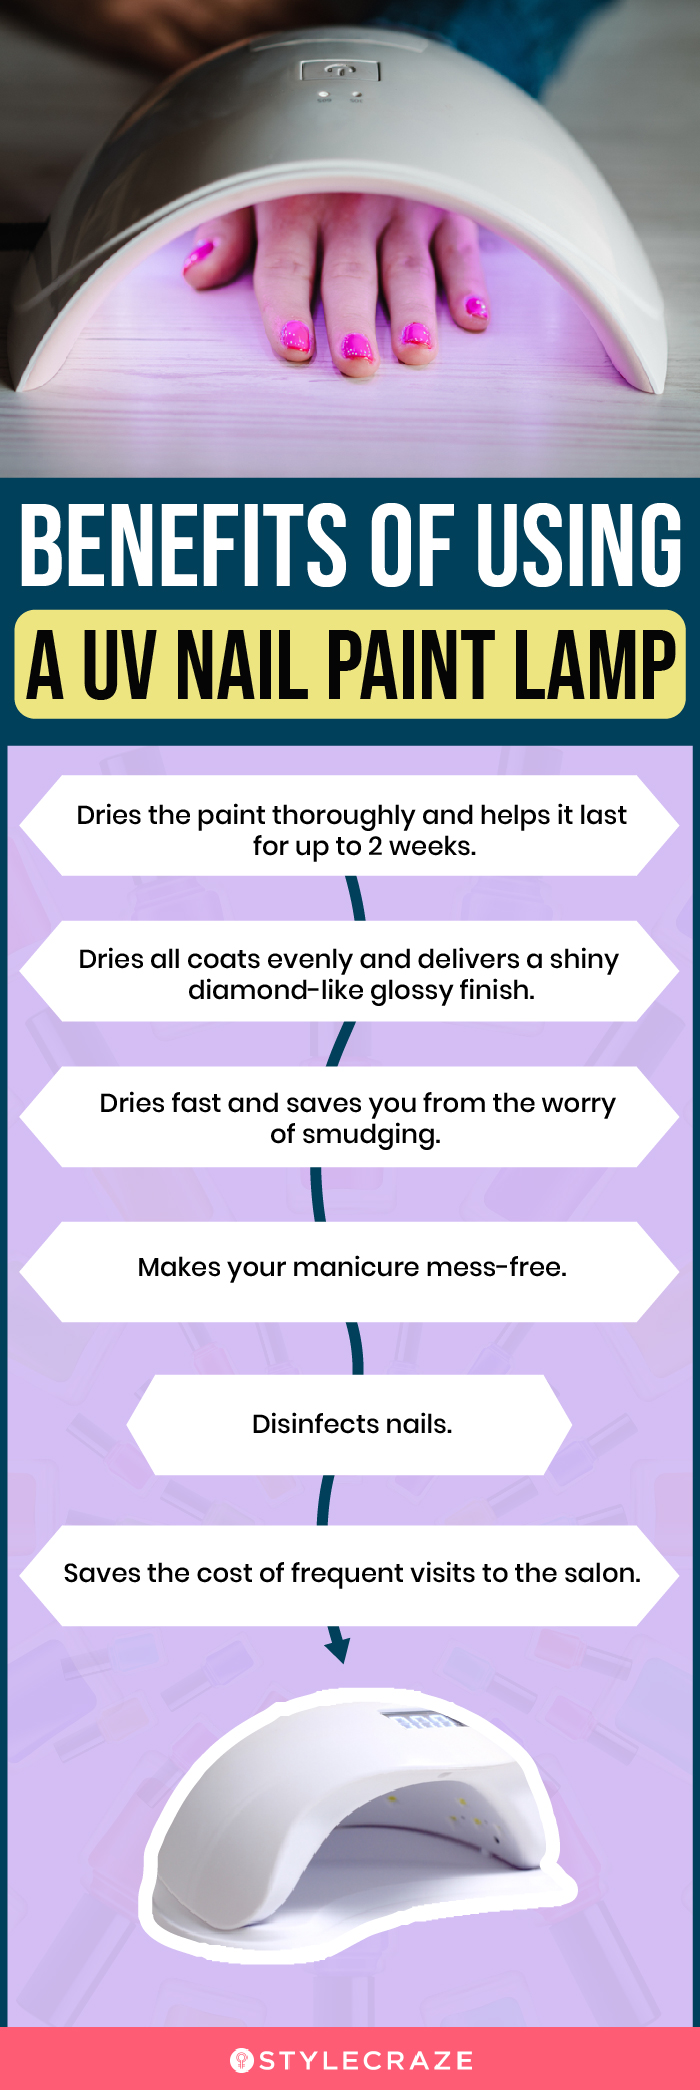 Benefits Of Using A UV Nail Paint Lamp (infographic)